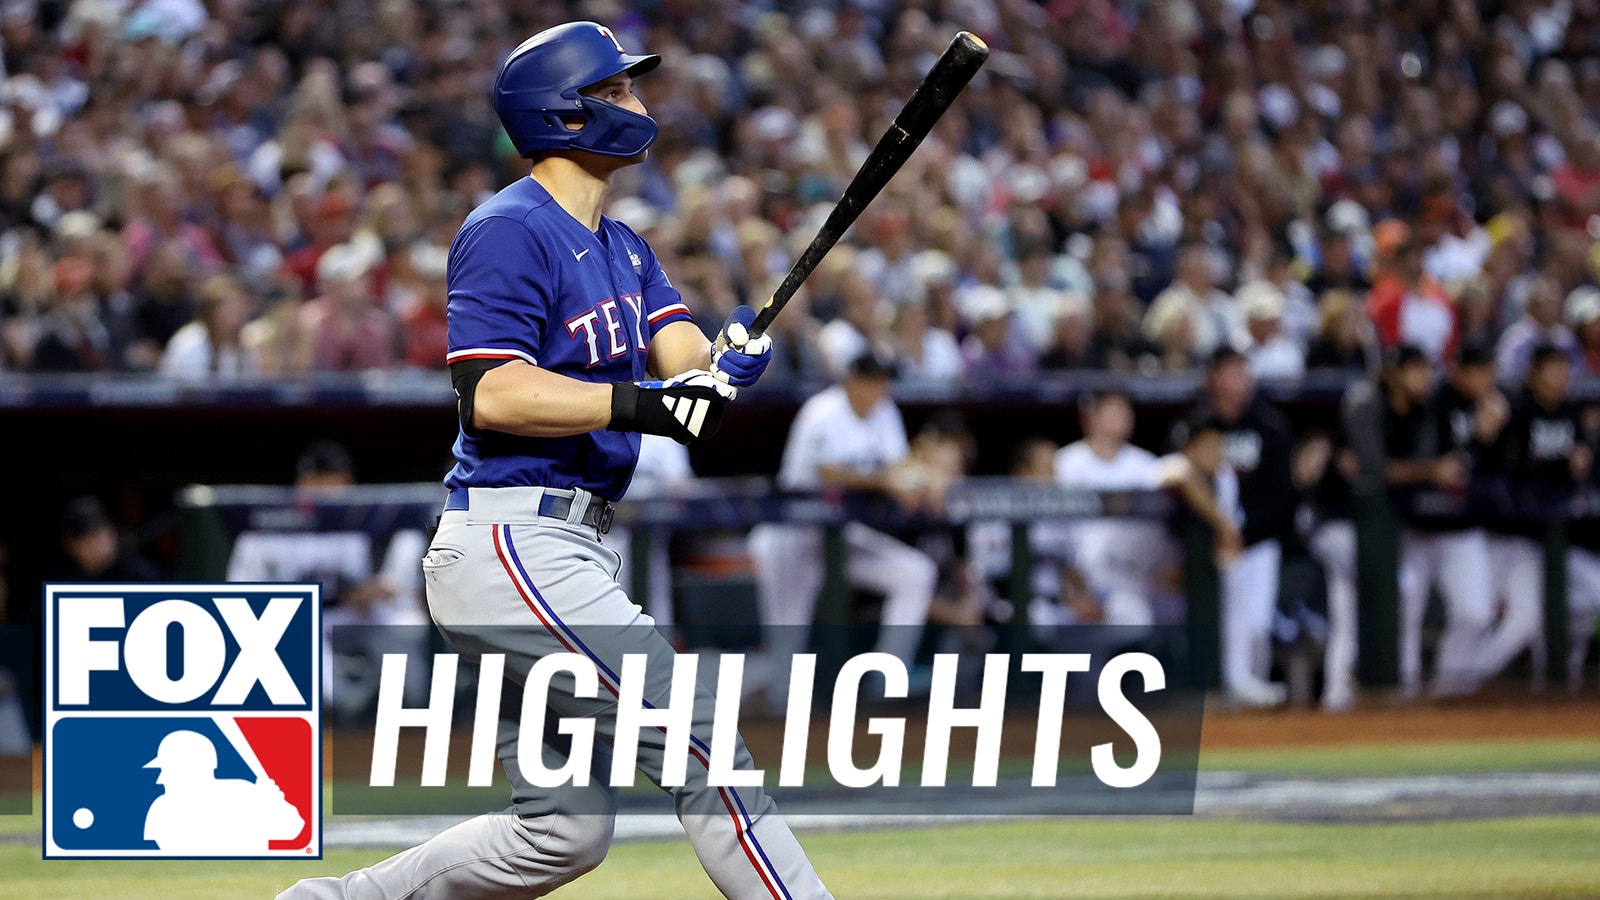 Corey Seager crushes two-run HR to give Rangers 3-0 lead vs. D-backs